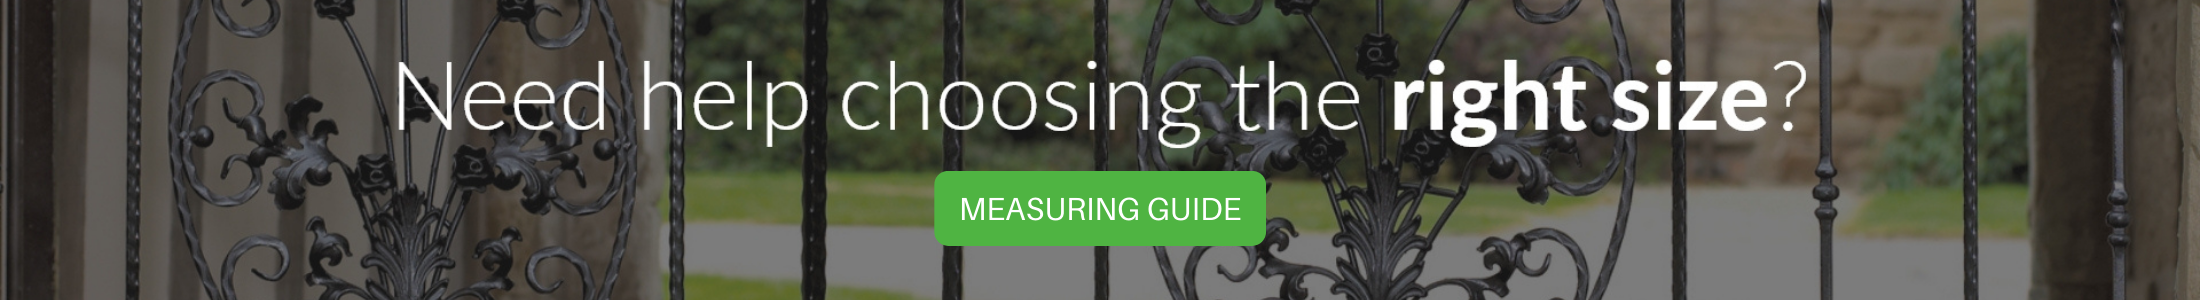 Visit the measuring guide for more information about order sizes